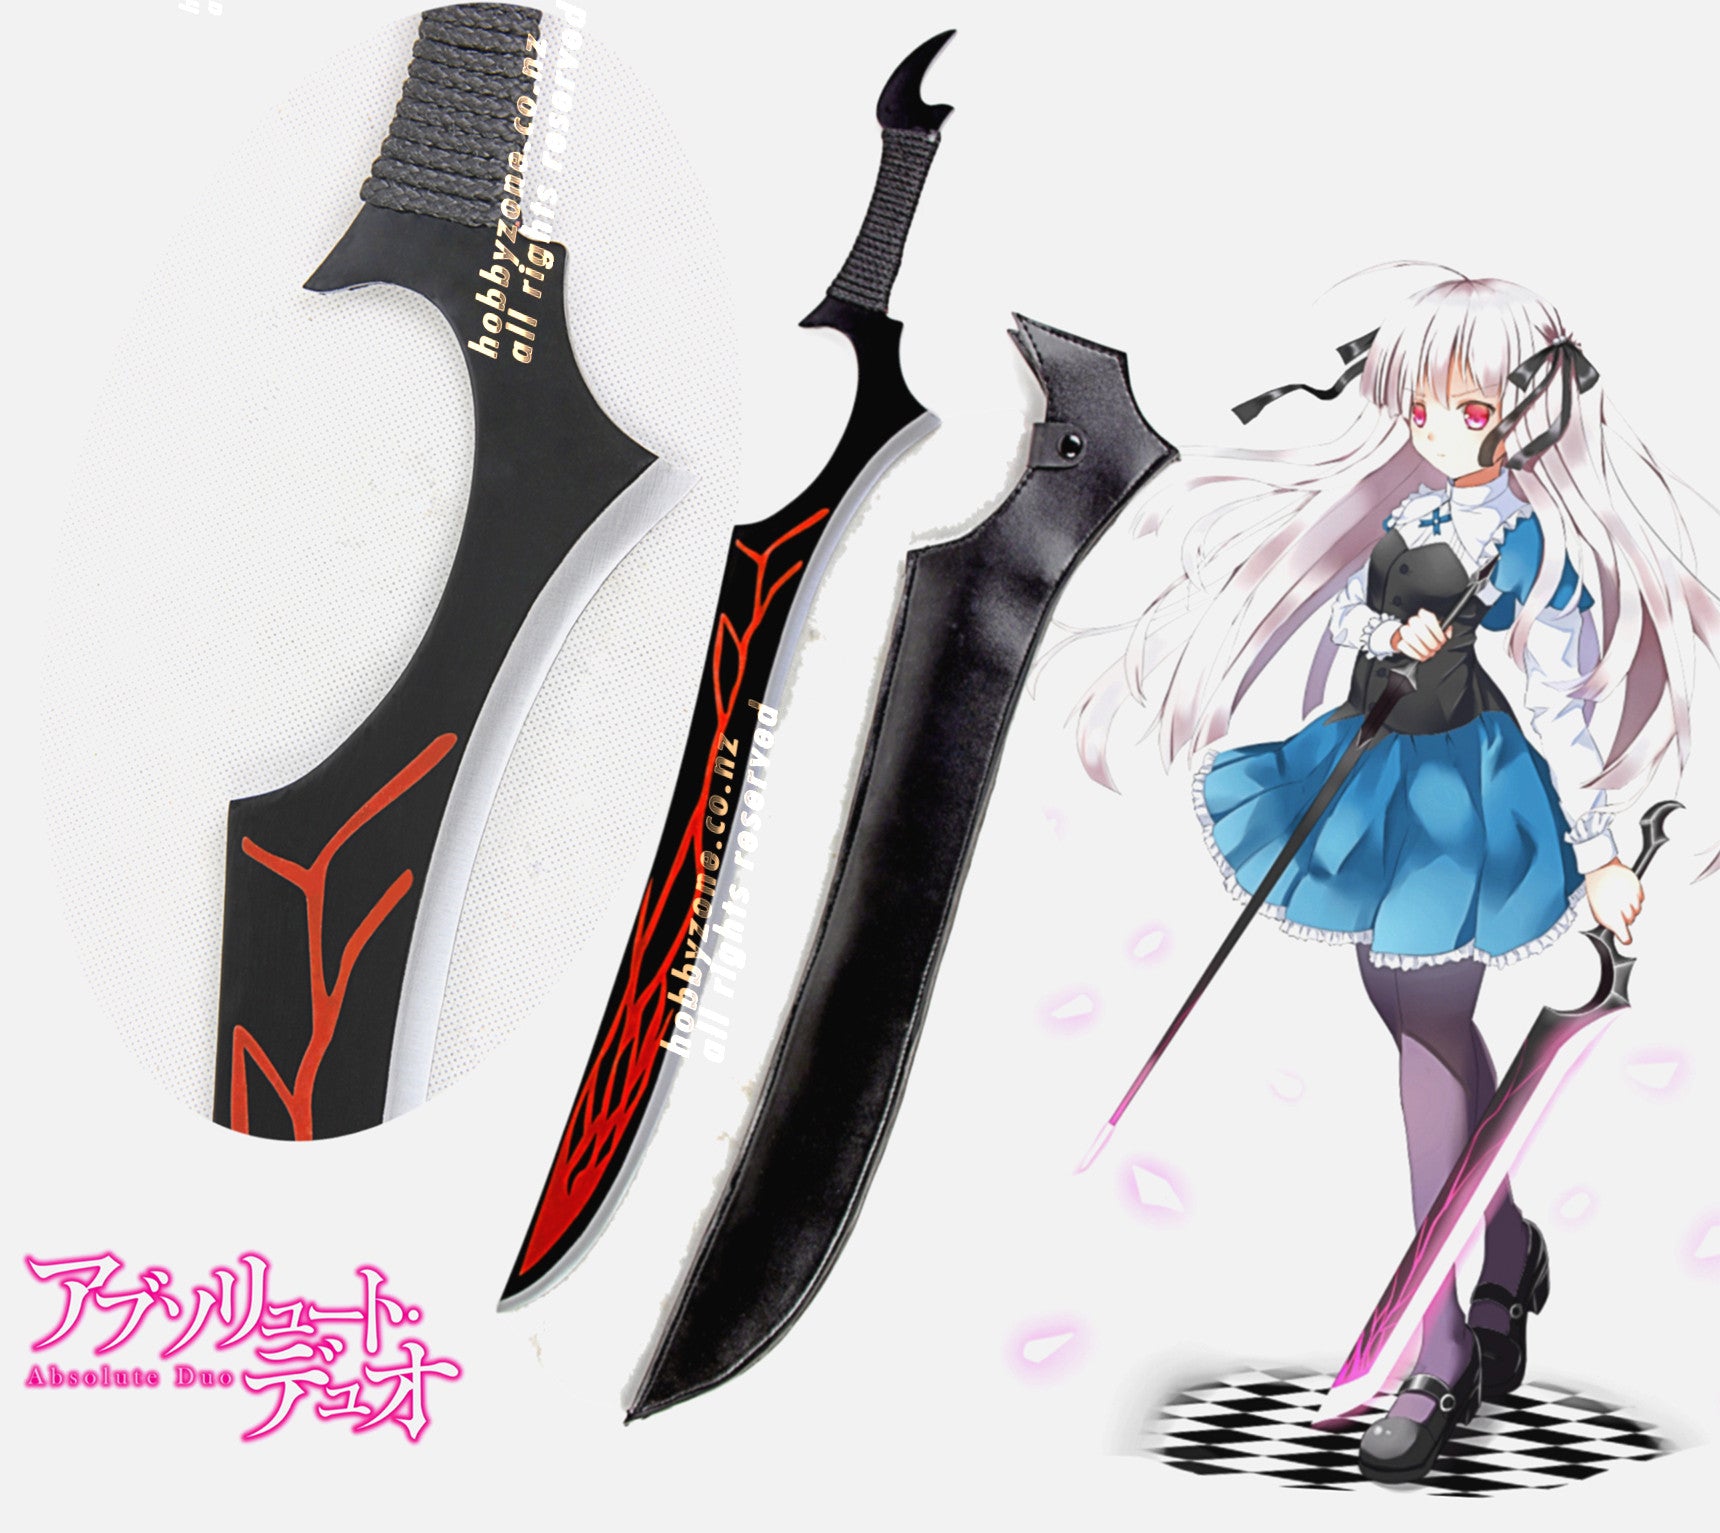 Anime Absolute Duo Julie Sigtuna Cosplay Costume@d